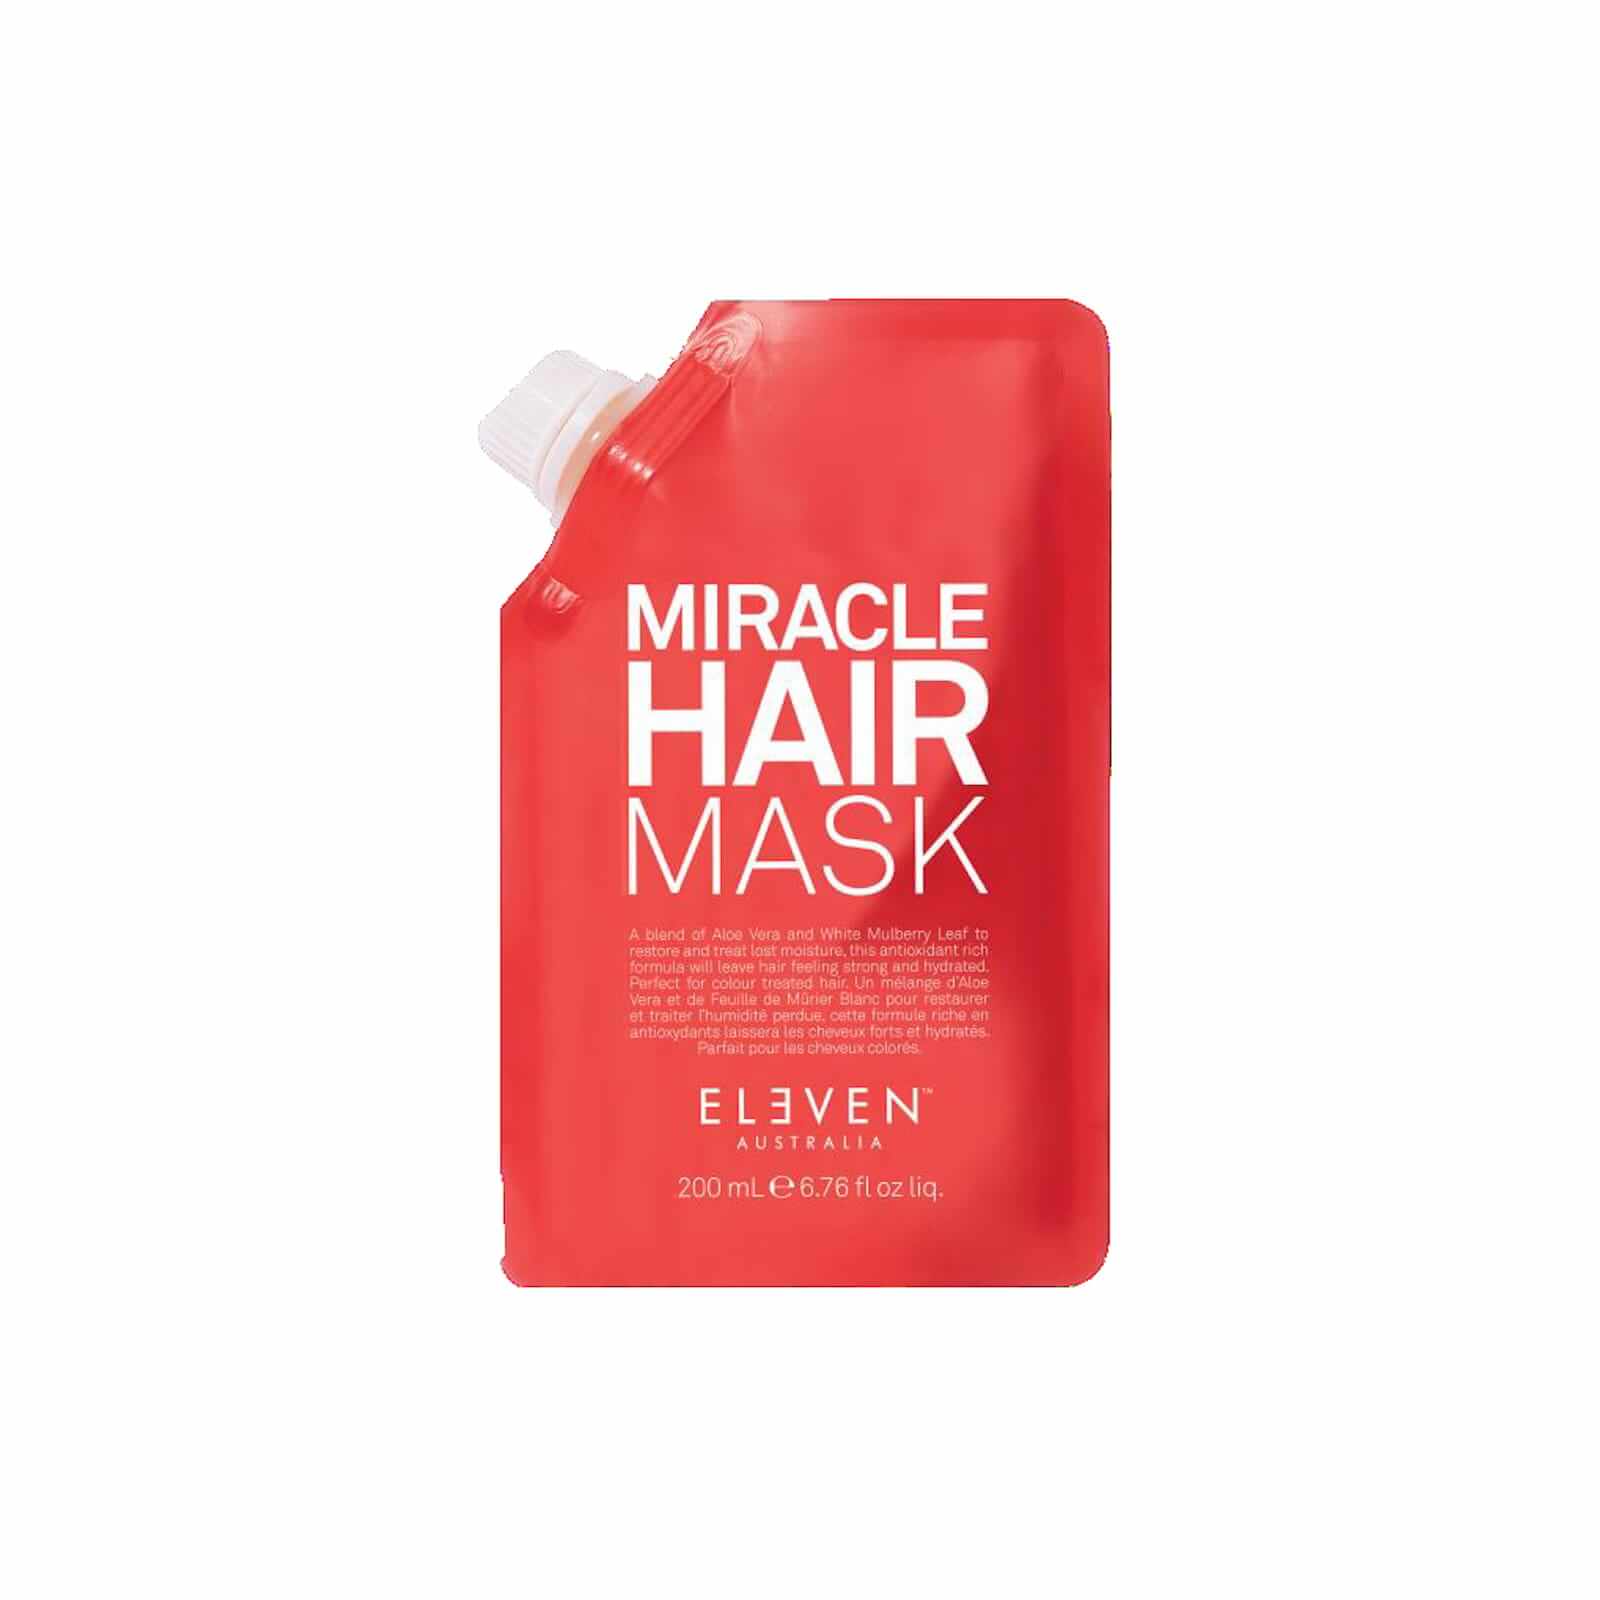 ELEVEN Australia Miracle Hair Mask | BUY ONLINE | North Laine Hair Co